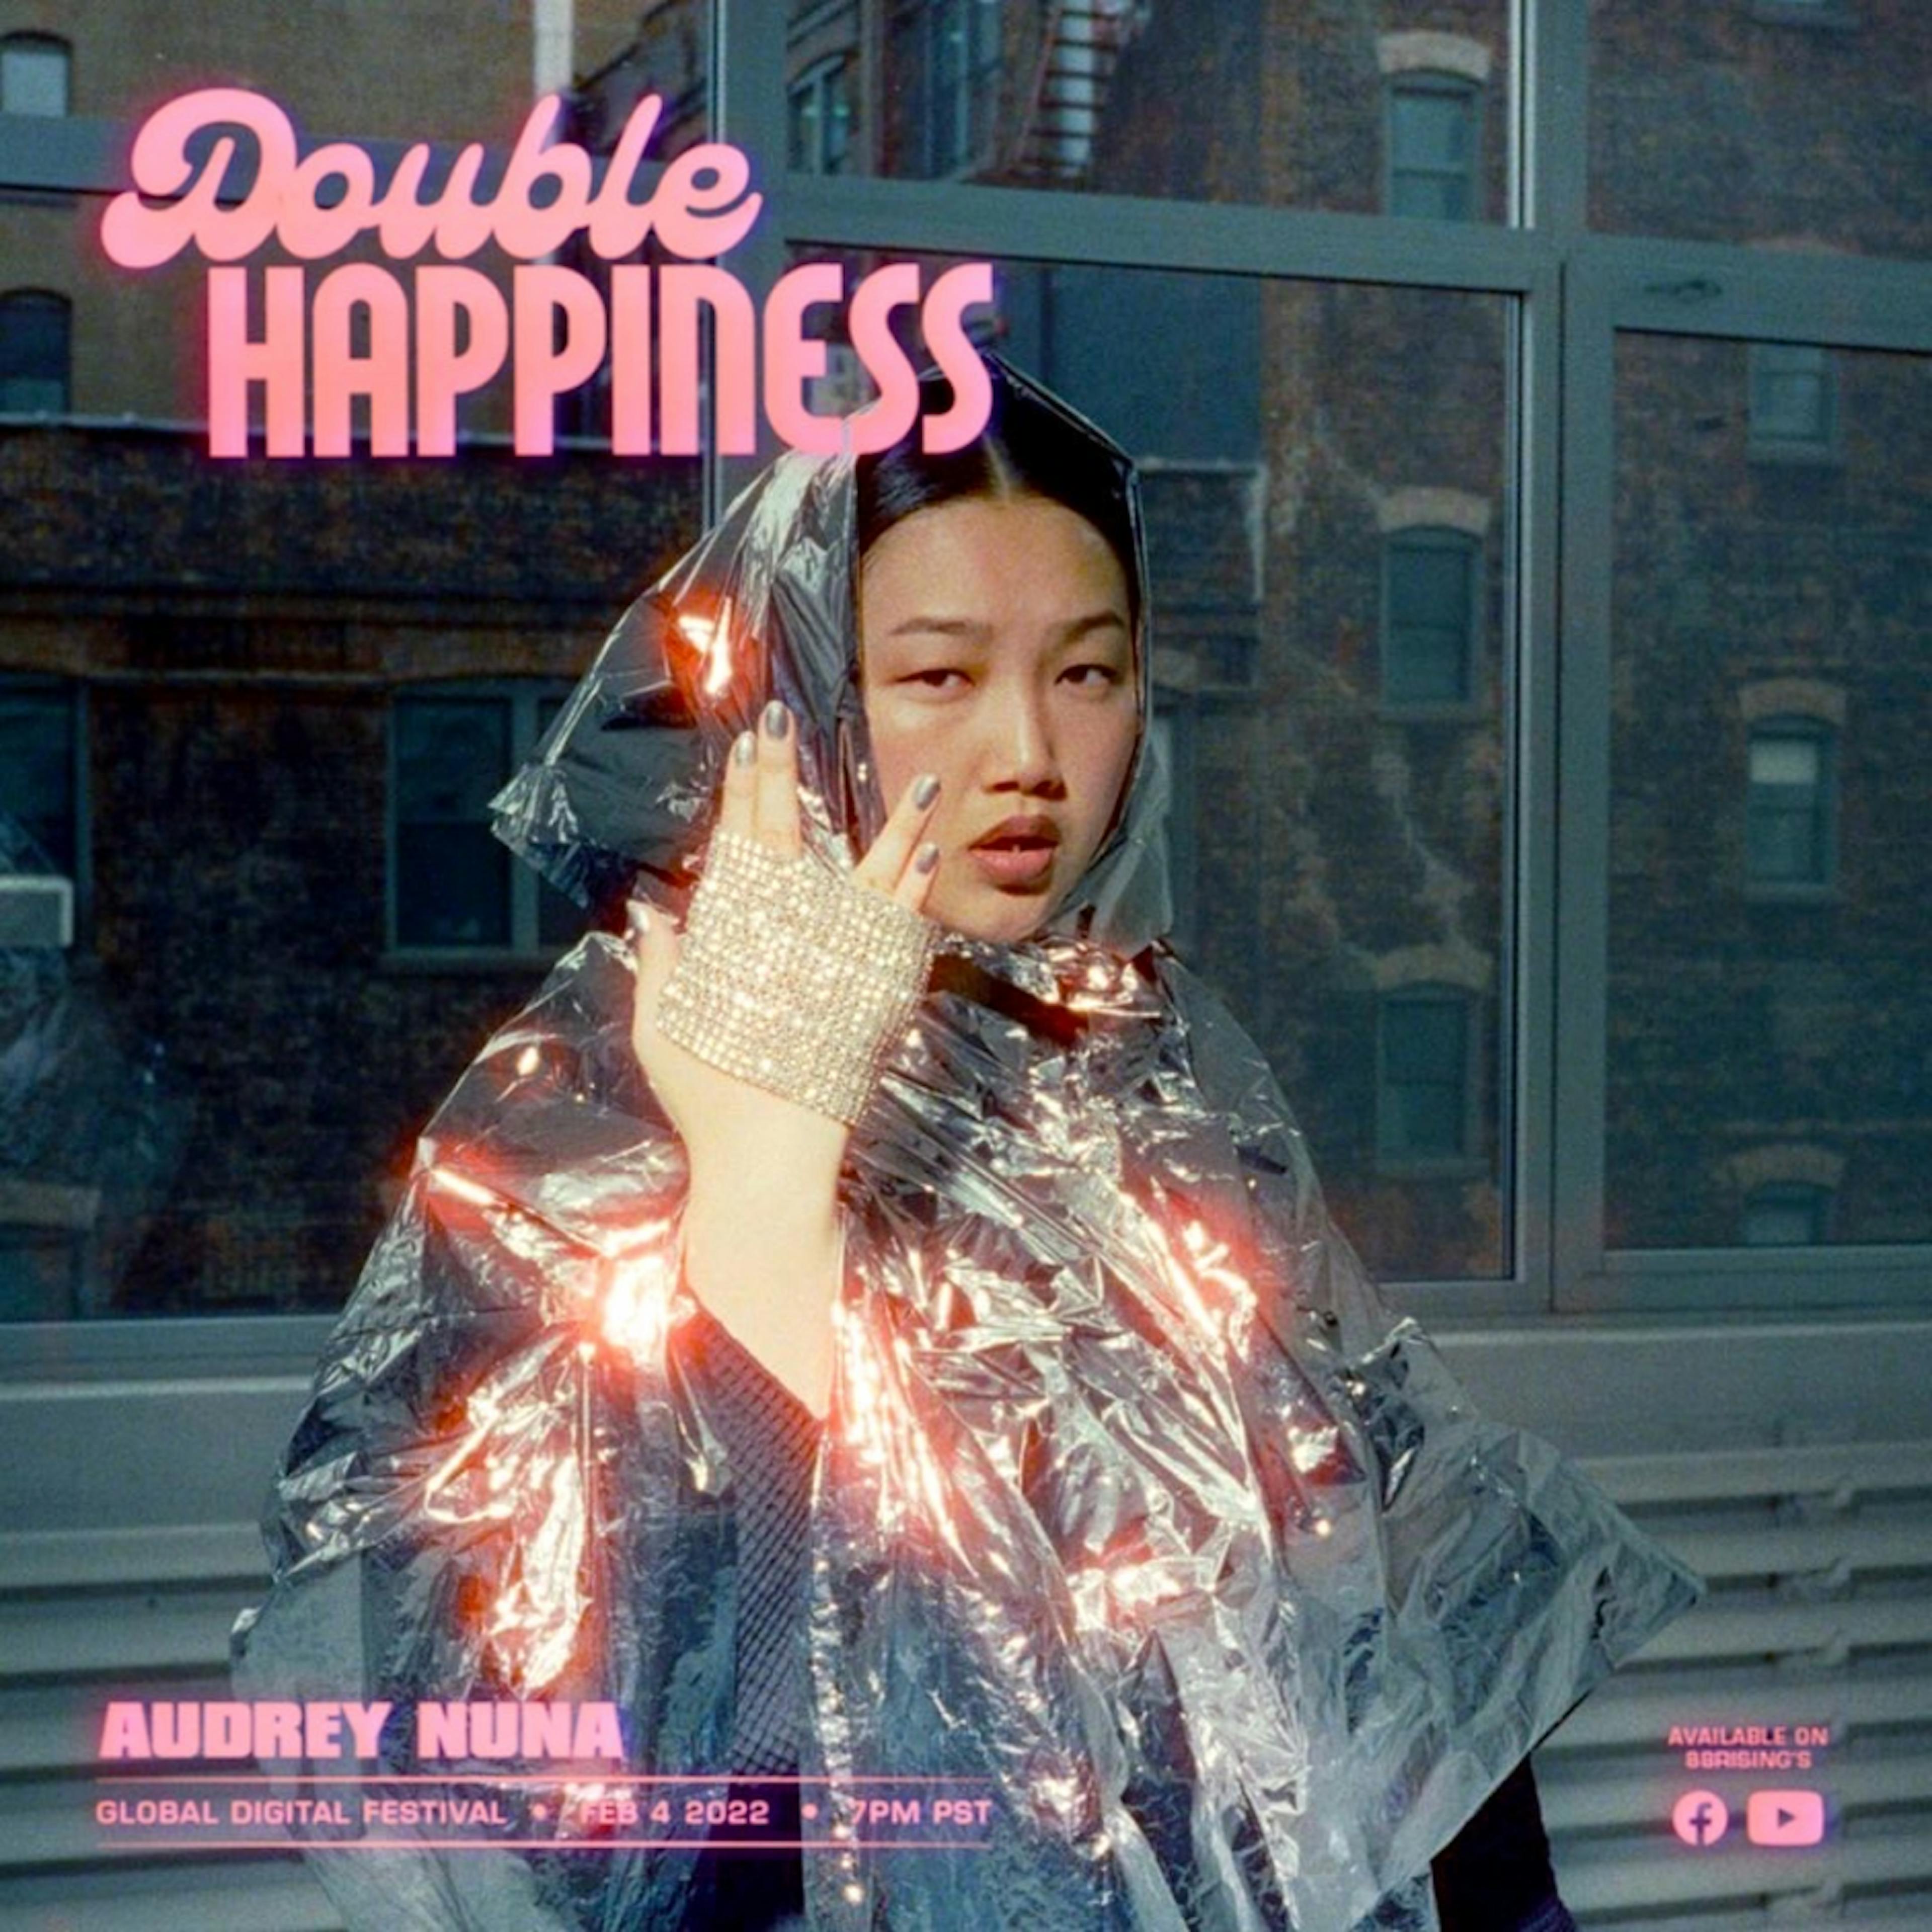 Promotional image for 'Double Happiness Global Digital Festival' featuring artist Audrey Nuna. She poses against an urban backdrop with apartment buildings visible through a window. Audrey is wearing a shiny, metallic rain poncho that catches the light, and her left hand is adorned with sparkling rings, raised to her face to draw attention. Her expression is cool and thoughtful. Above her, in neon-pink cursive, reads 'Double Happiness', and below in pink block letters are her name and the event details, noting the date as February 4, 2022, at 7 PM PST.